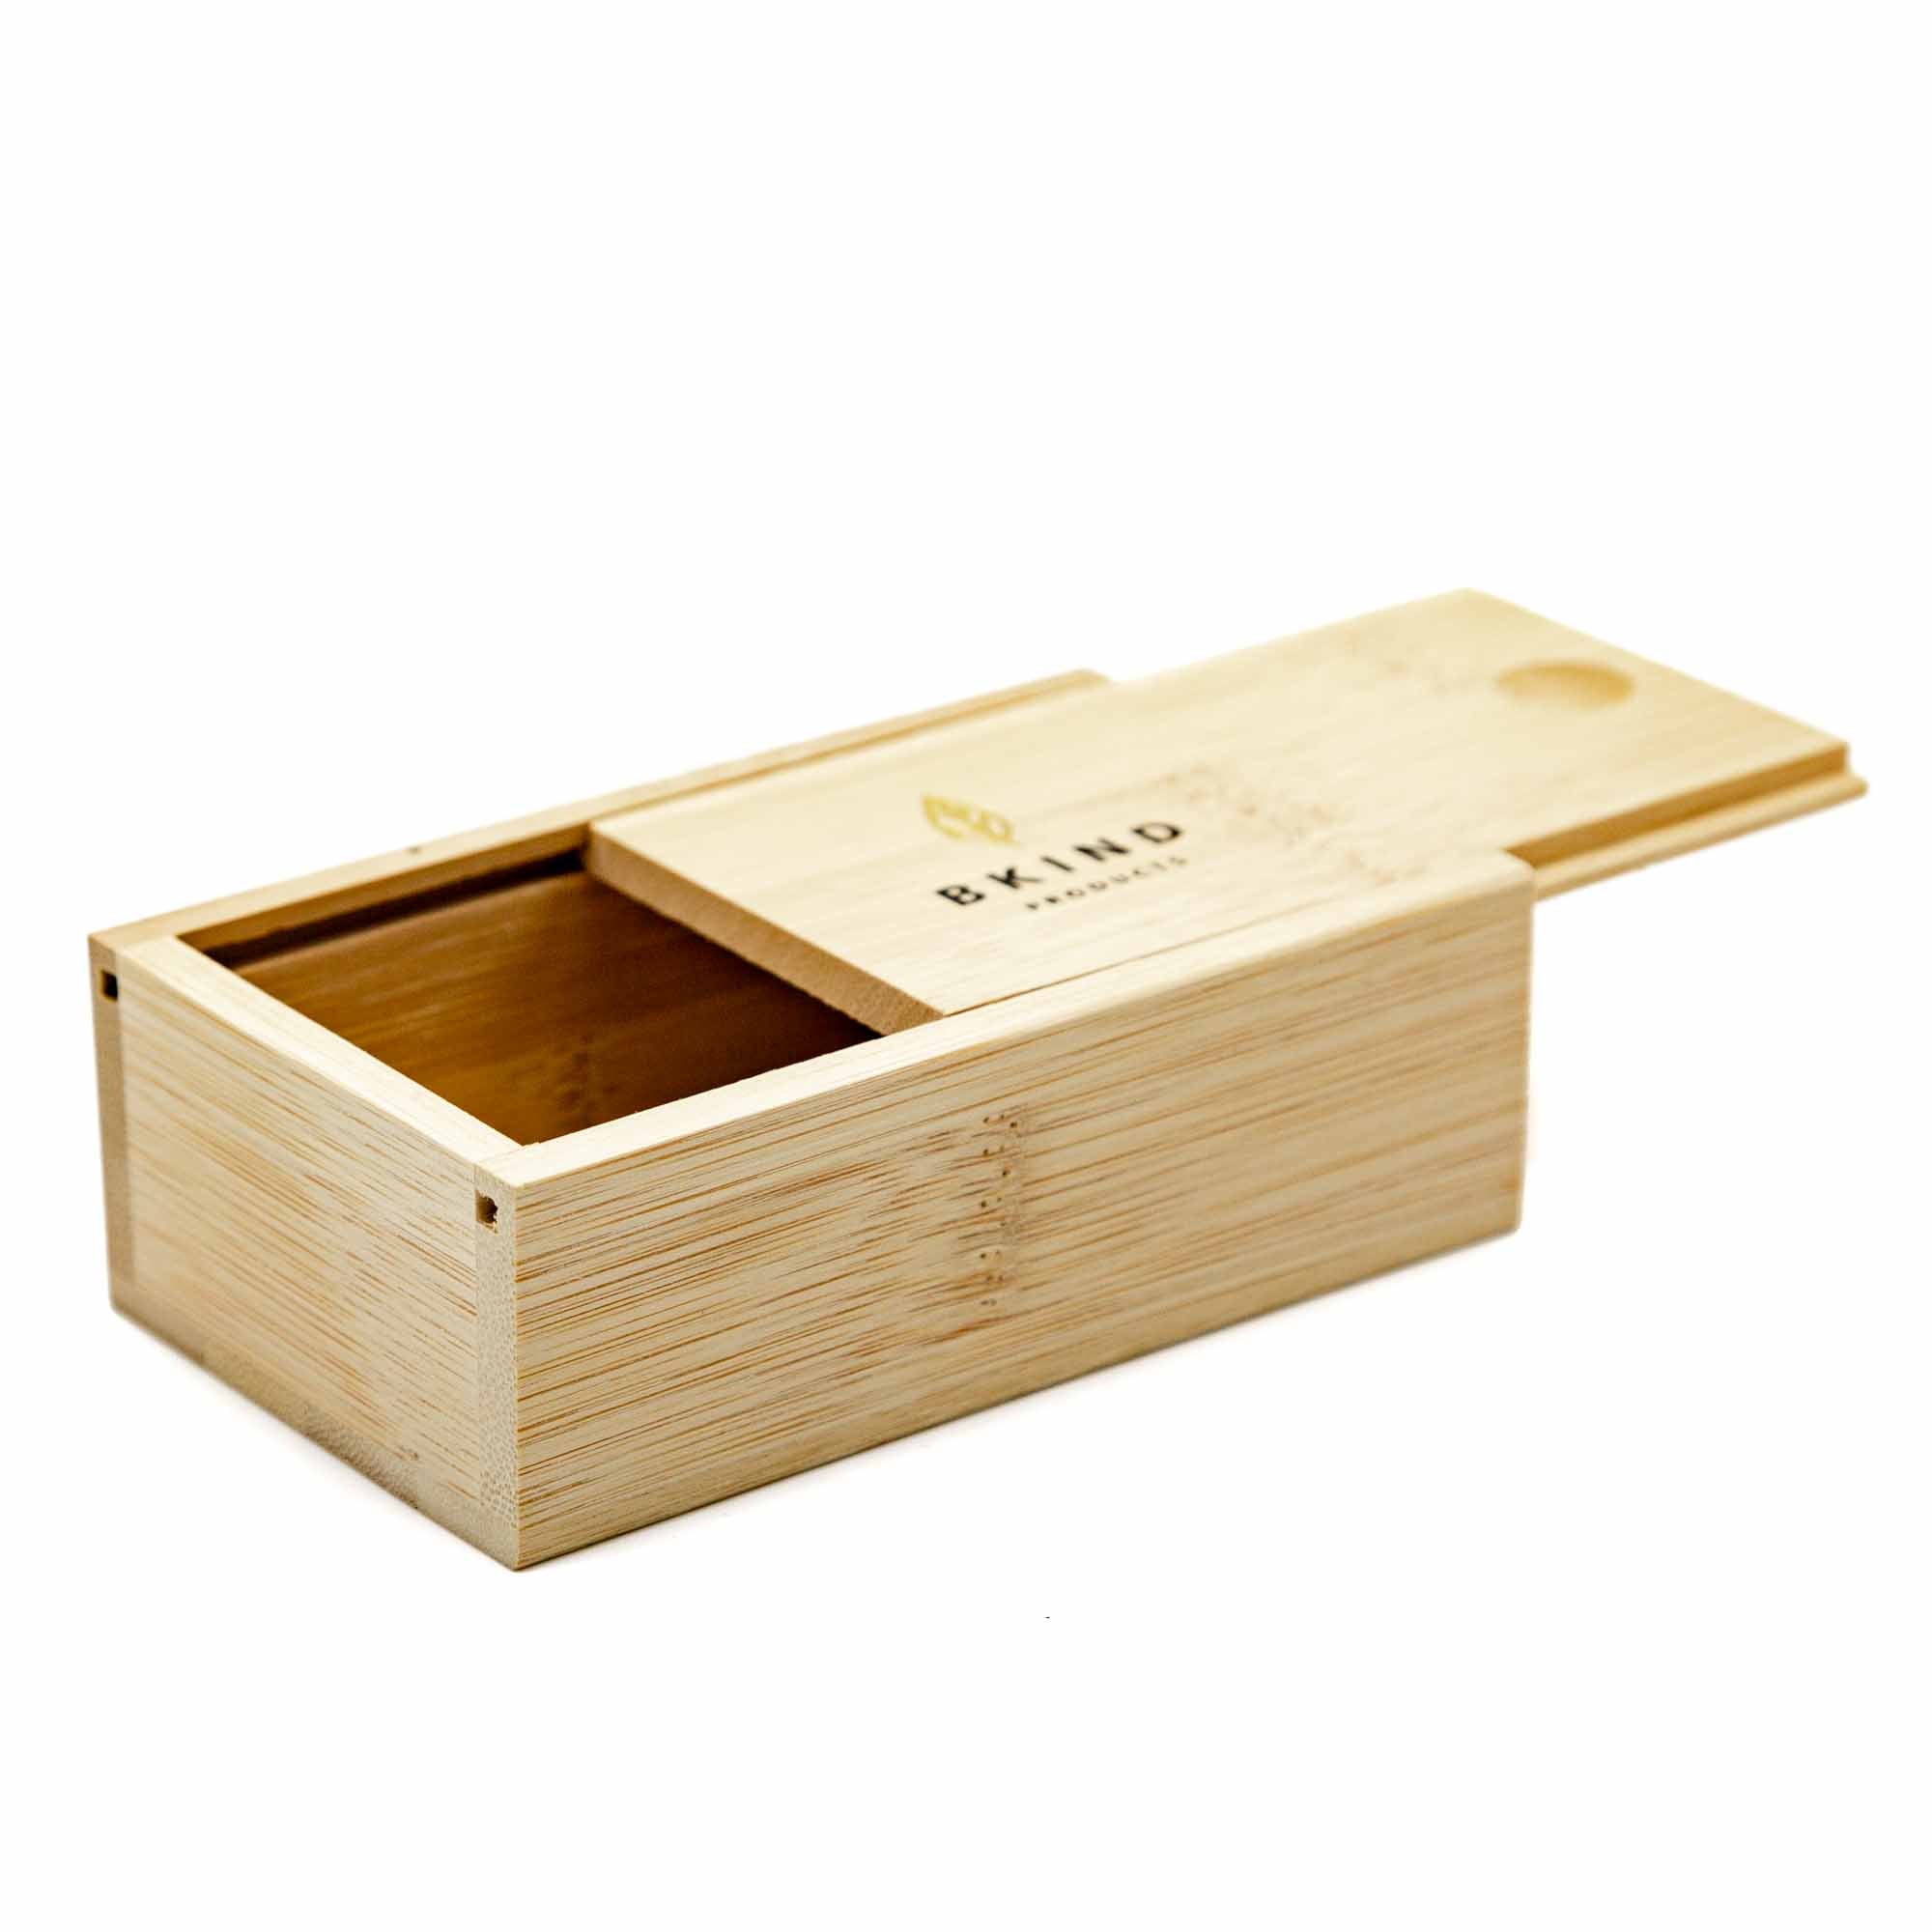 BKIND Bamboo Case for Shampoo/Conditioner - Mortise And Tenon